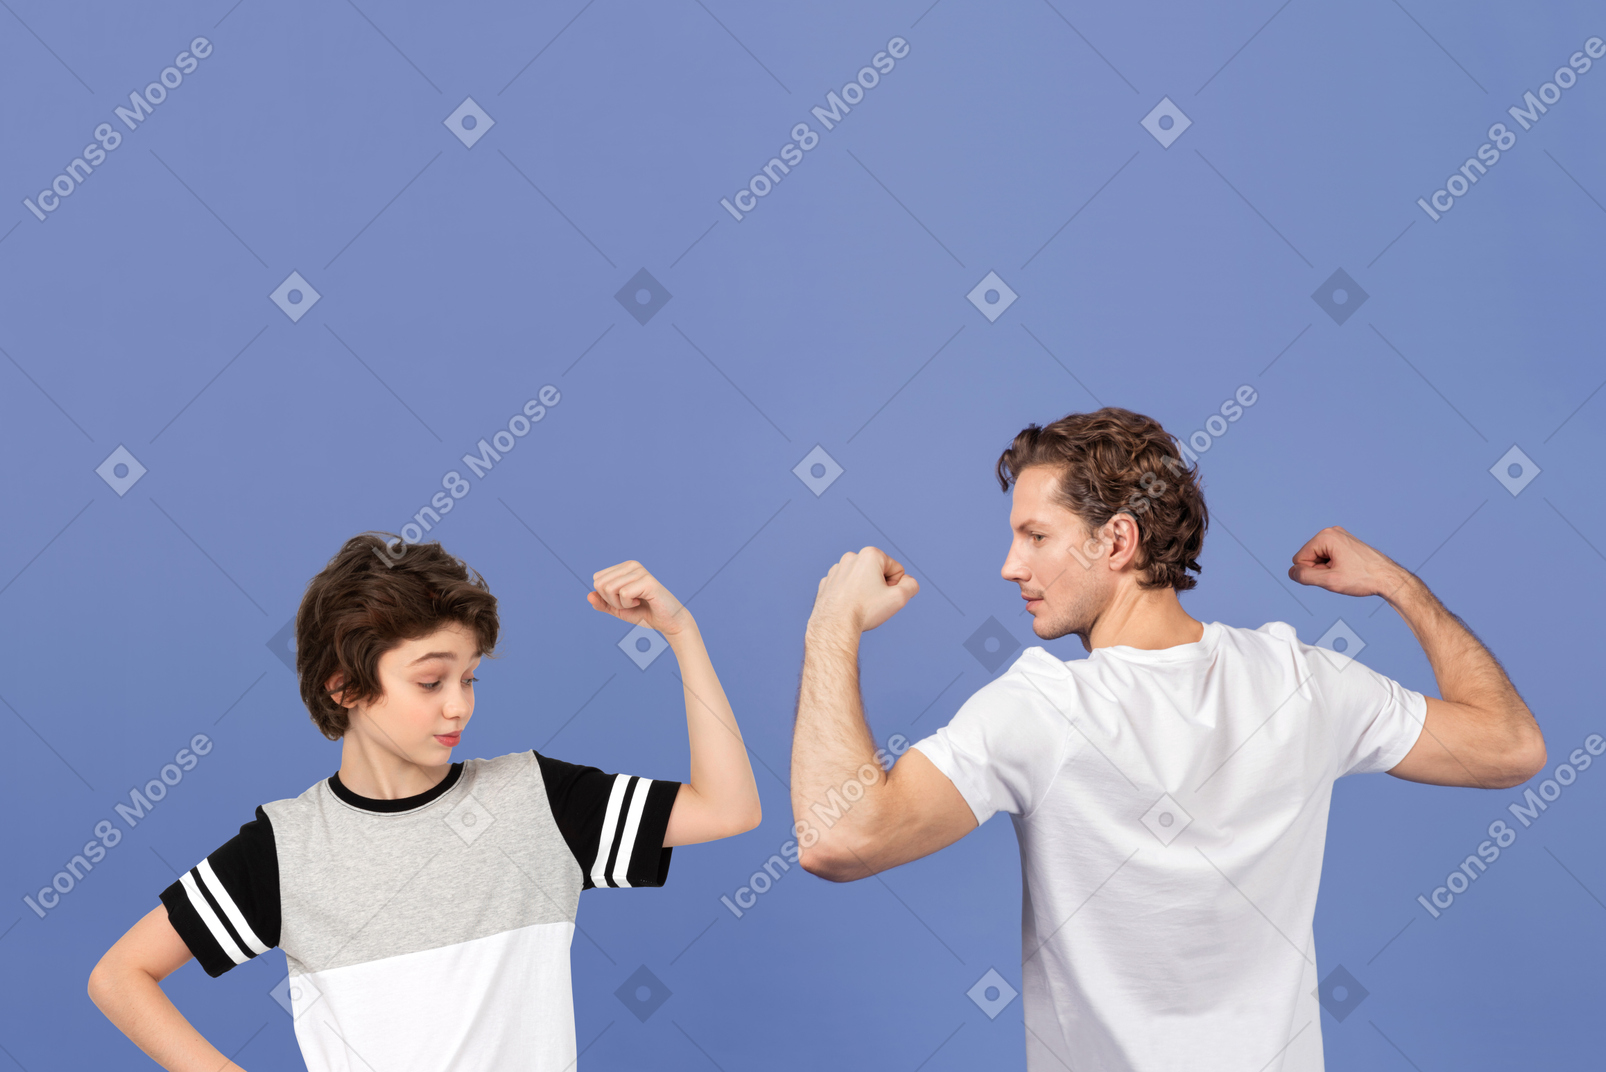 Dad, look, my biceps have grown a little